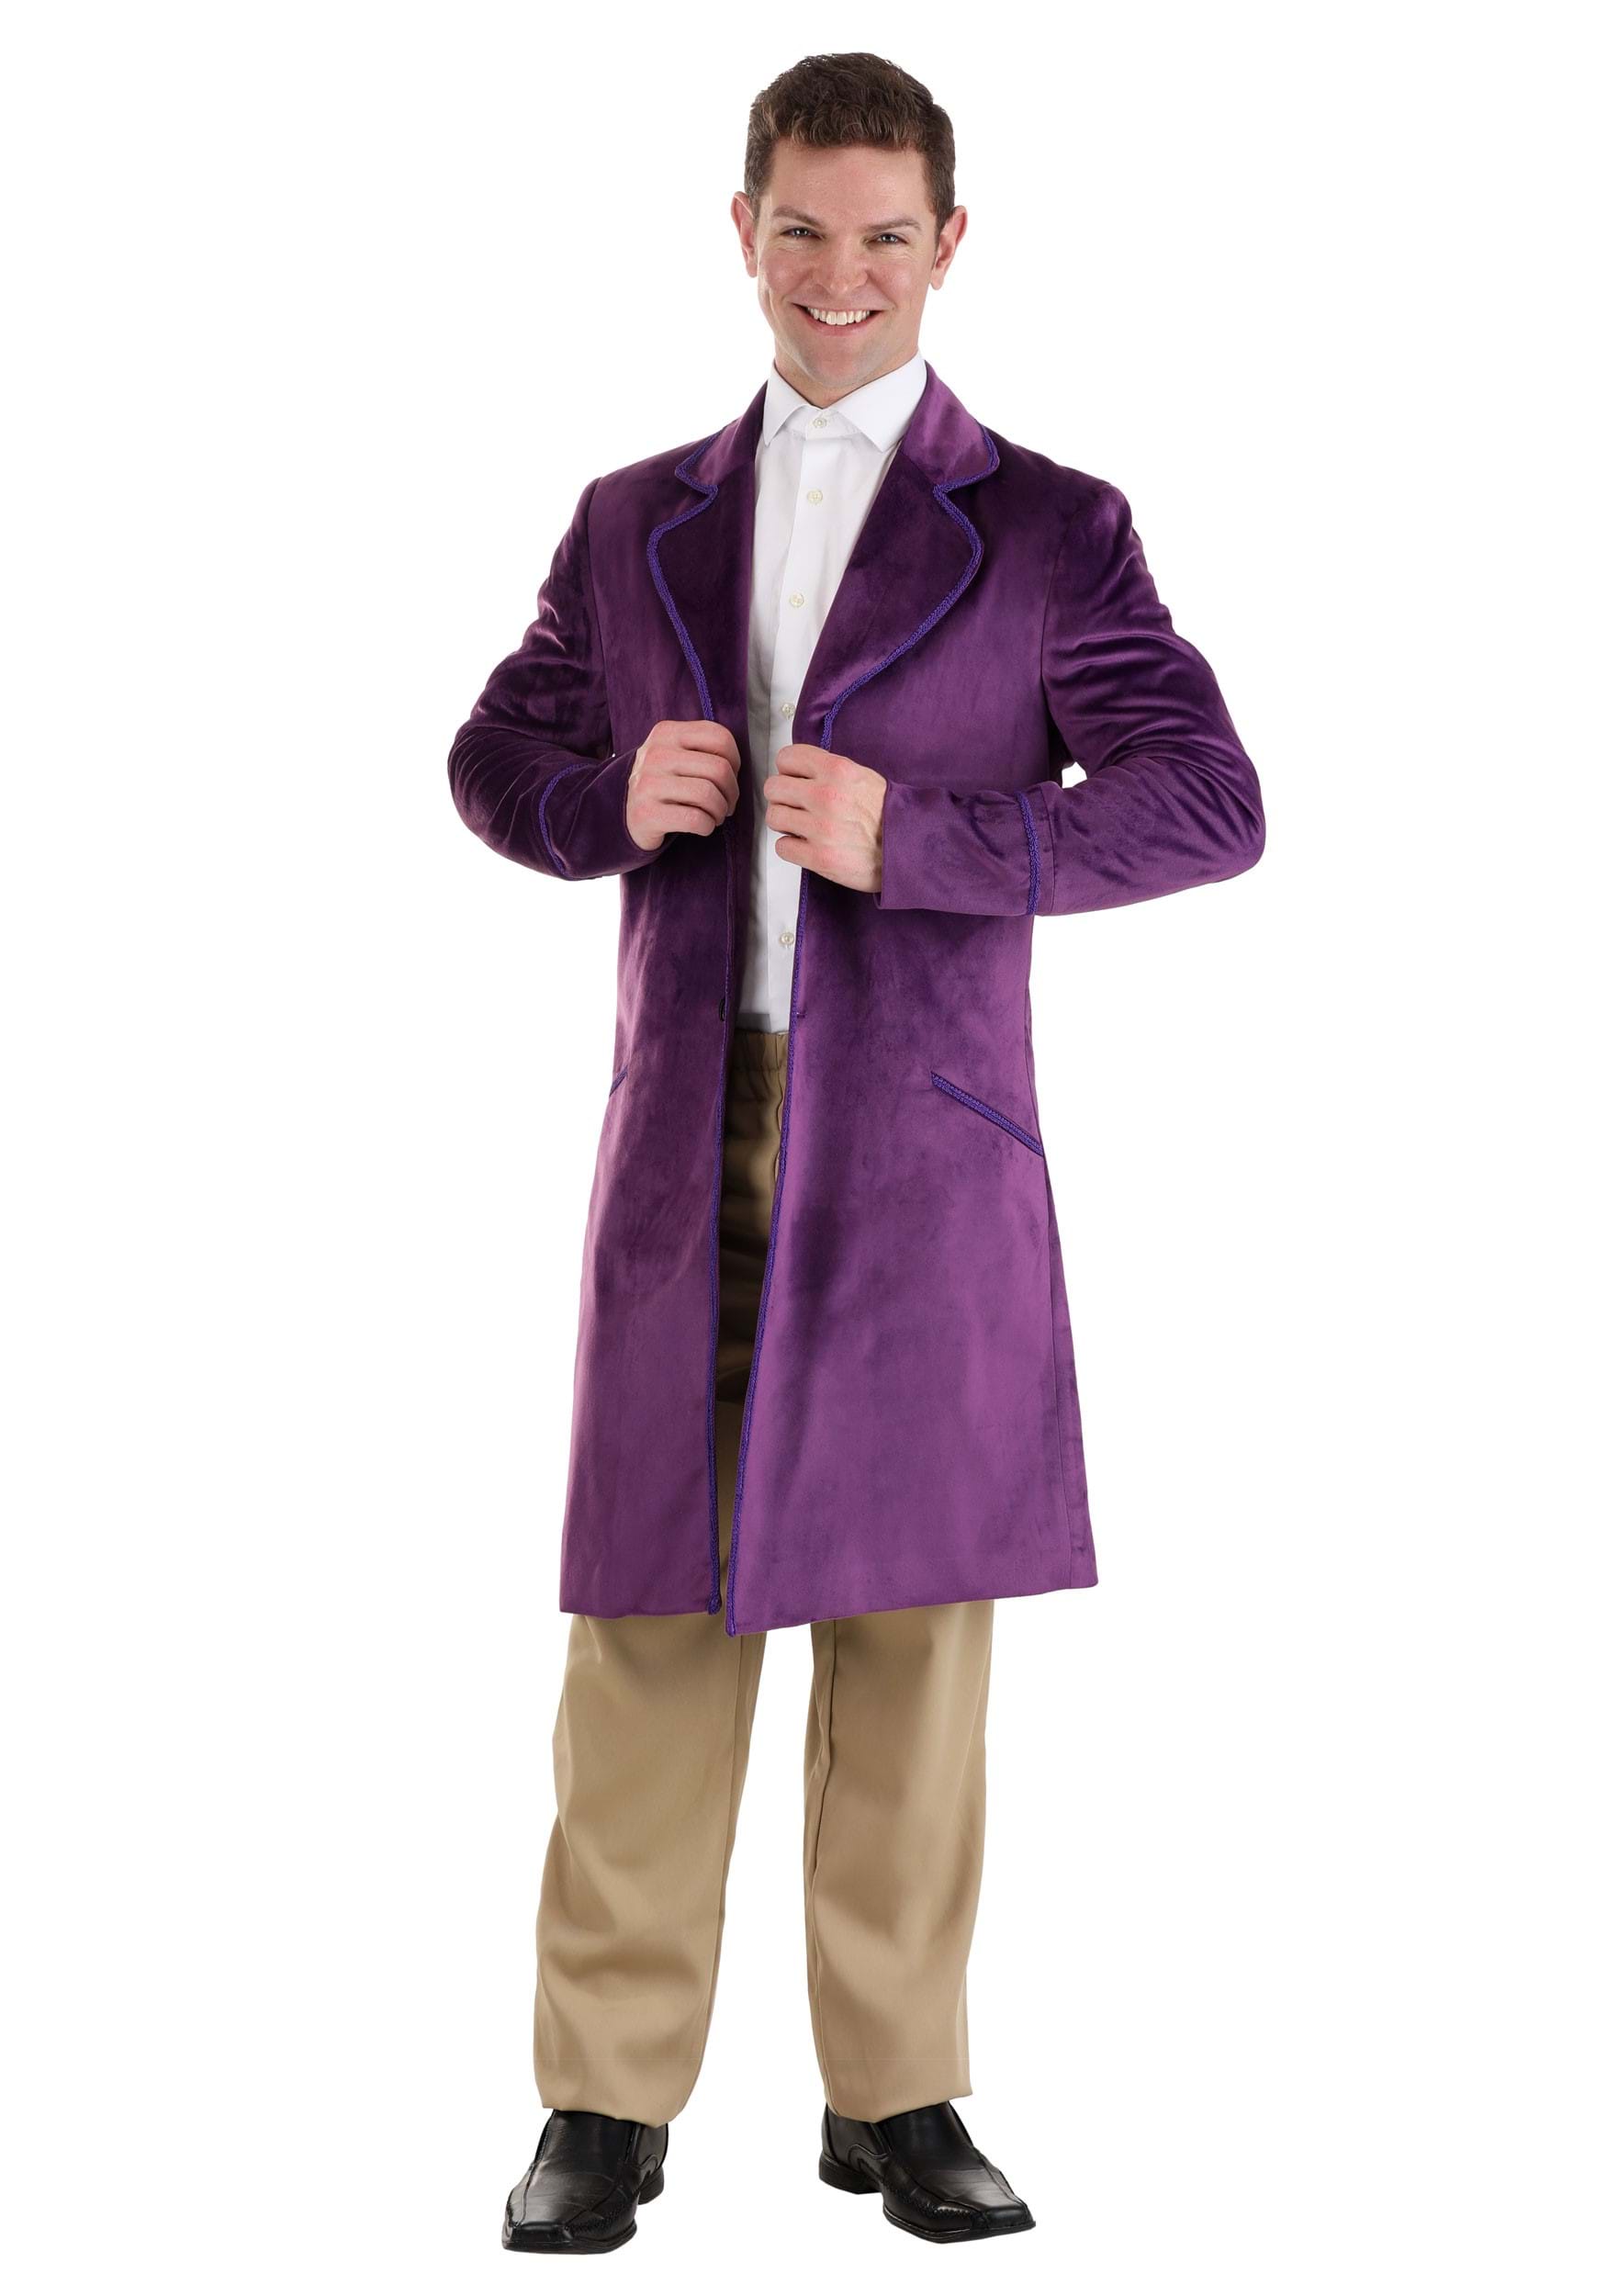 Image of Authentic Willy Wonka Costume Jacket for Men | Willy Wonka Costumes ID FUN1986AD-48